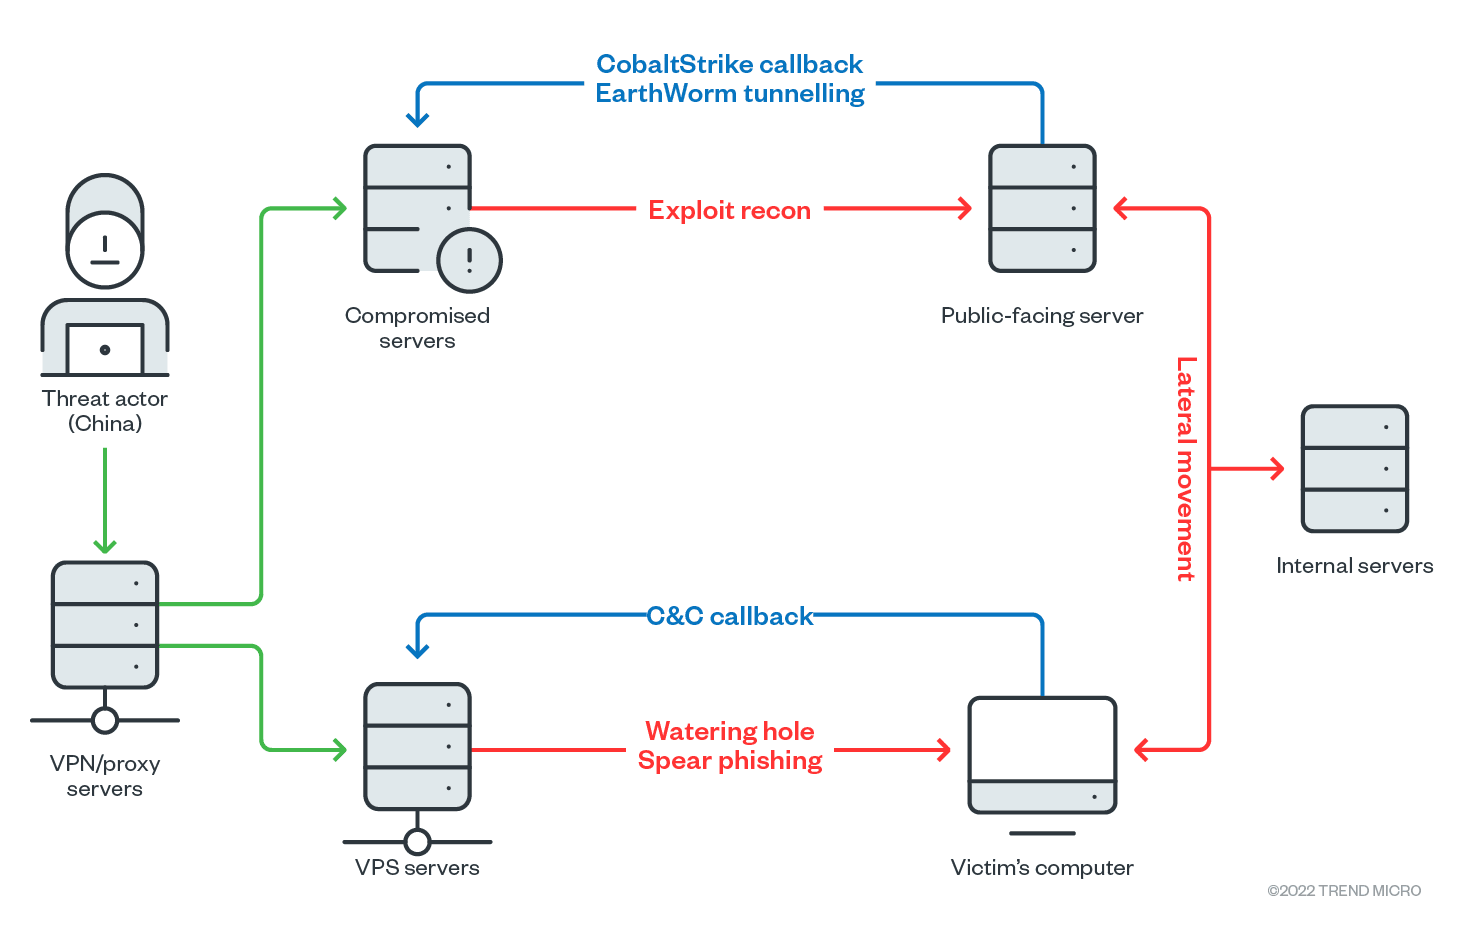 Figure 1. An overview of Earth Lusca’s infrastructure